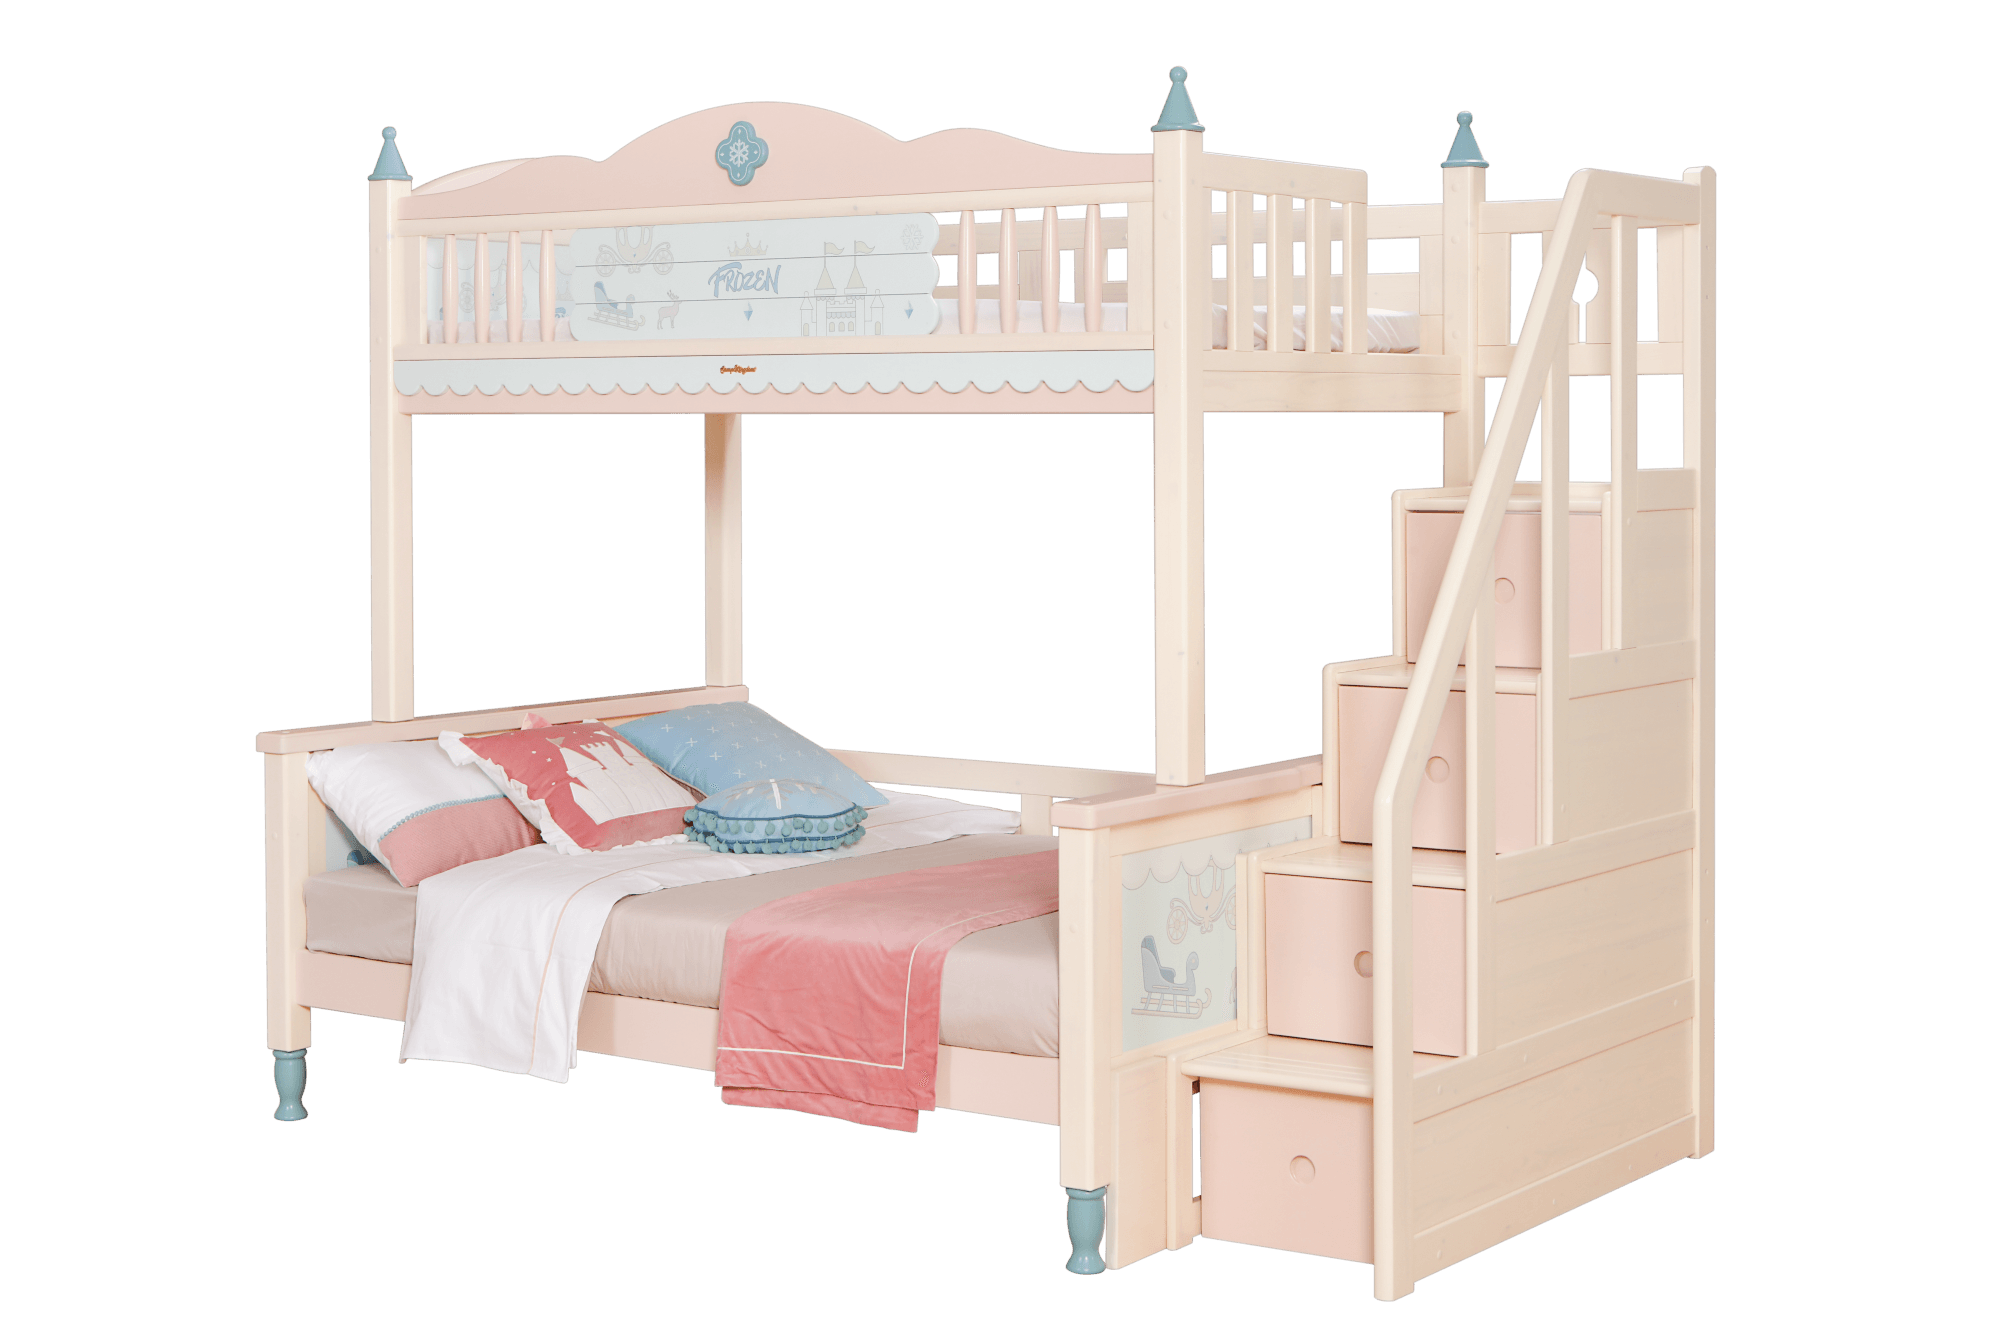 Sampo Frozen Bunk Bed w Staircase - Kids Haven